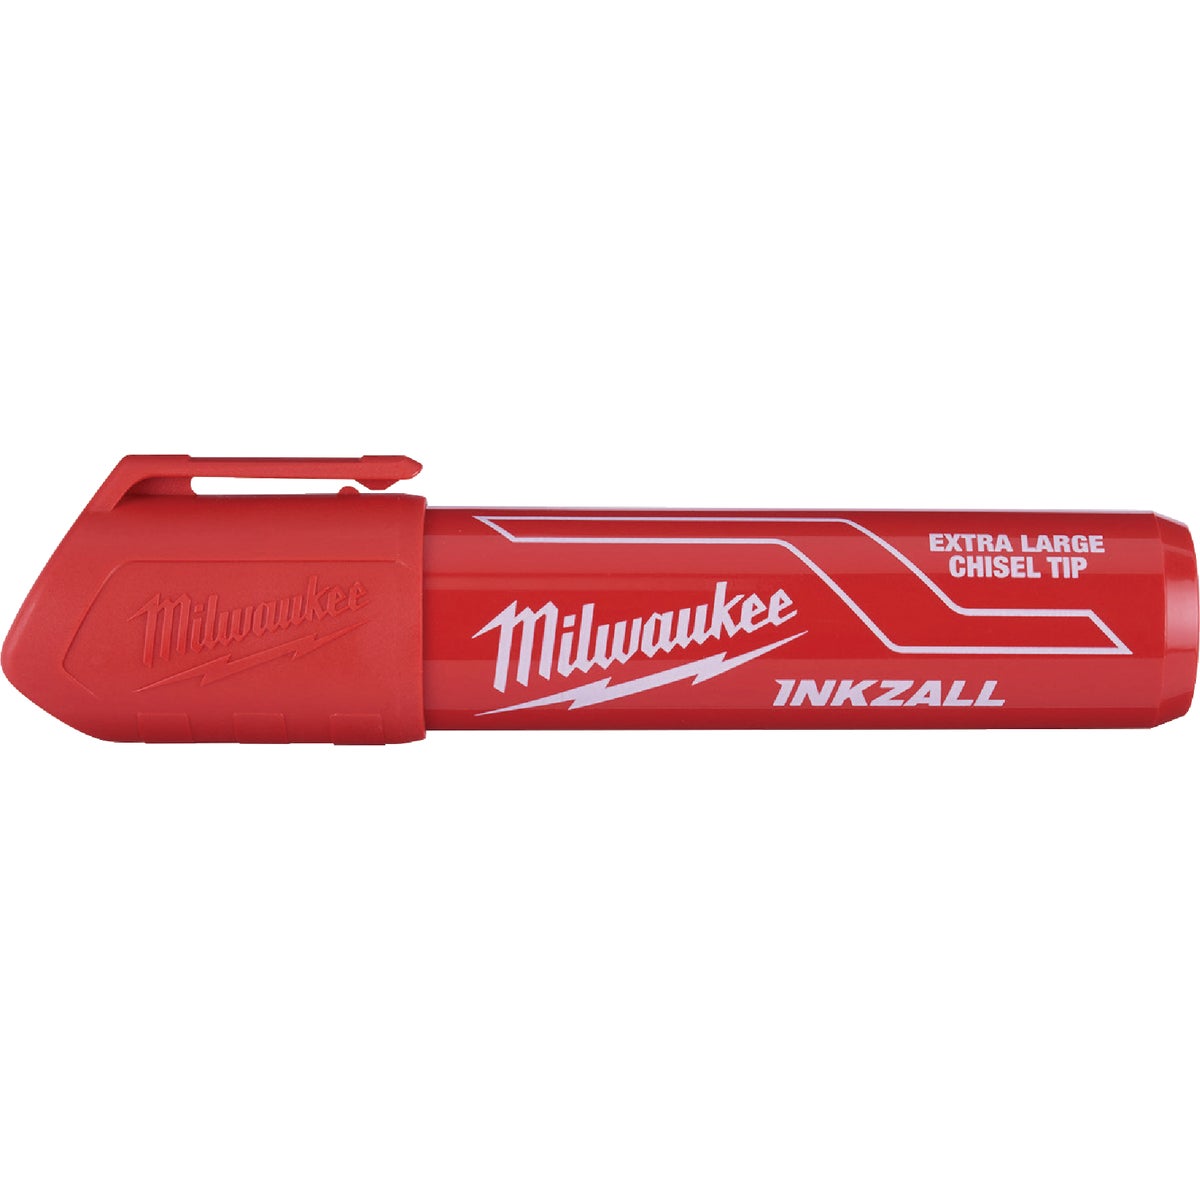 Milwaukee INKZALL Extra Large Chisel Tip Red Job Site Marker